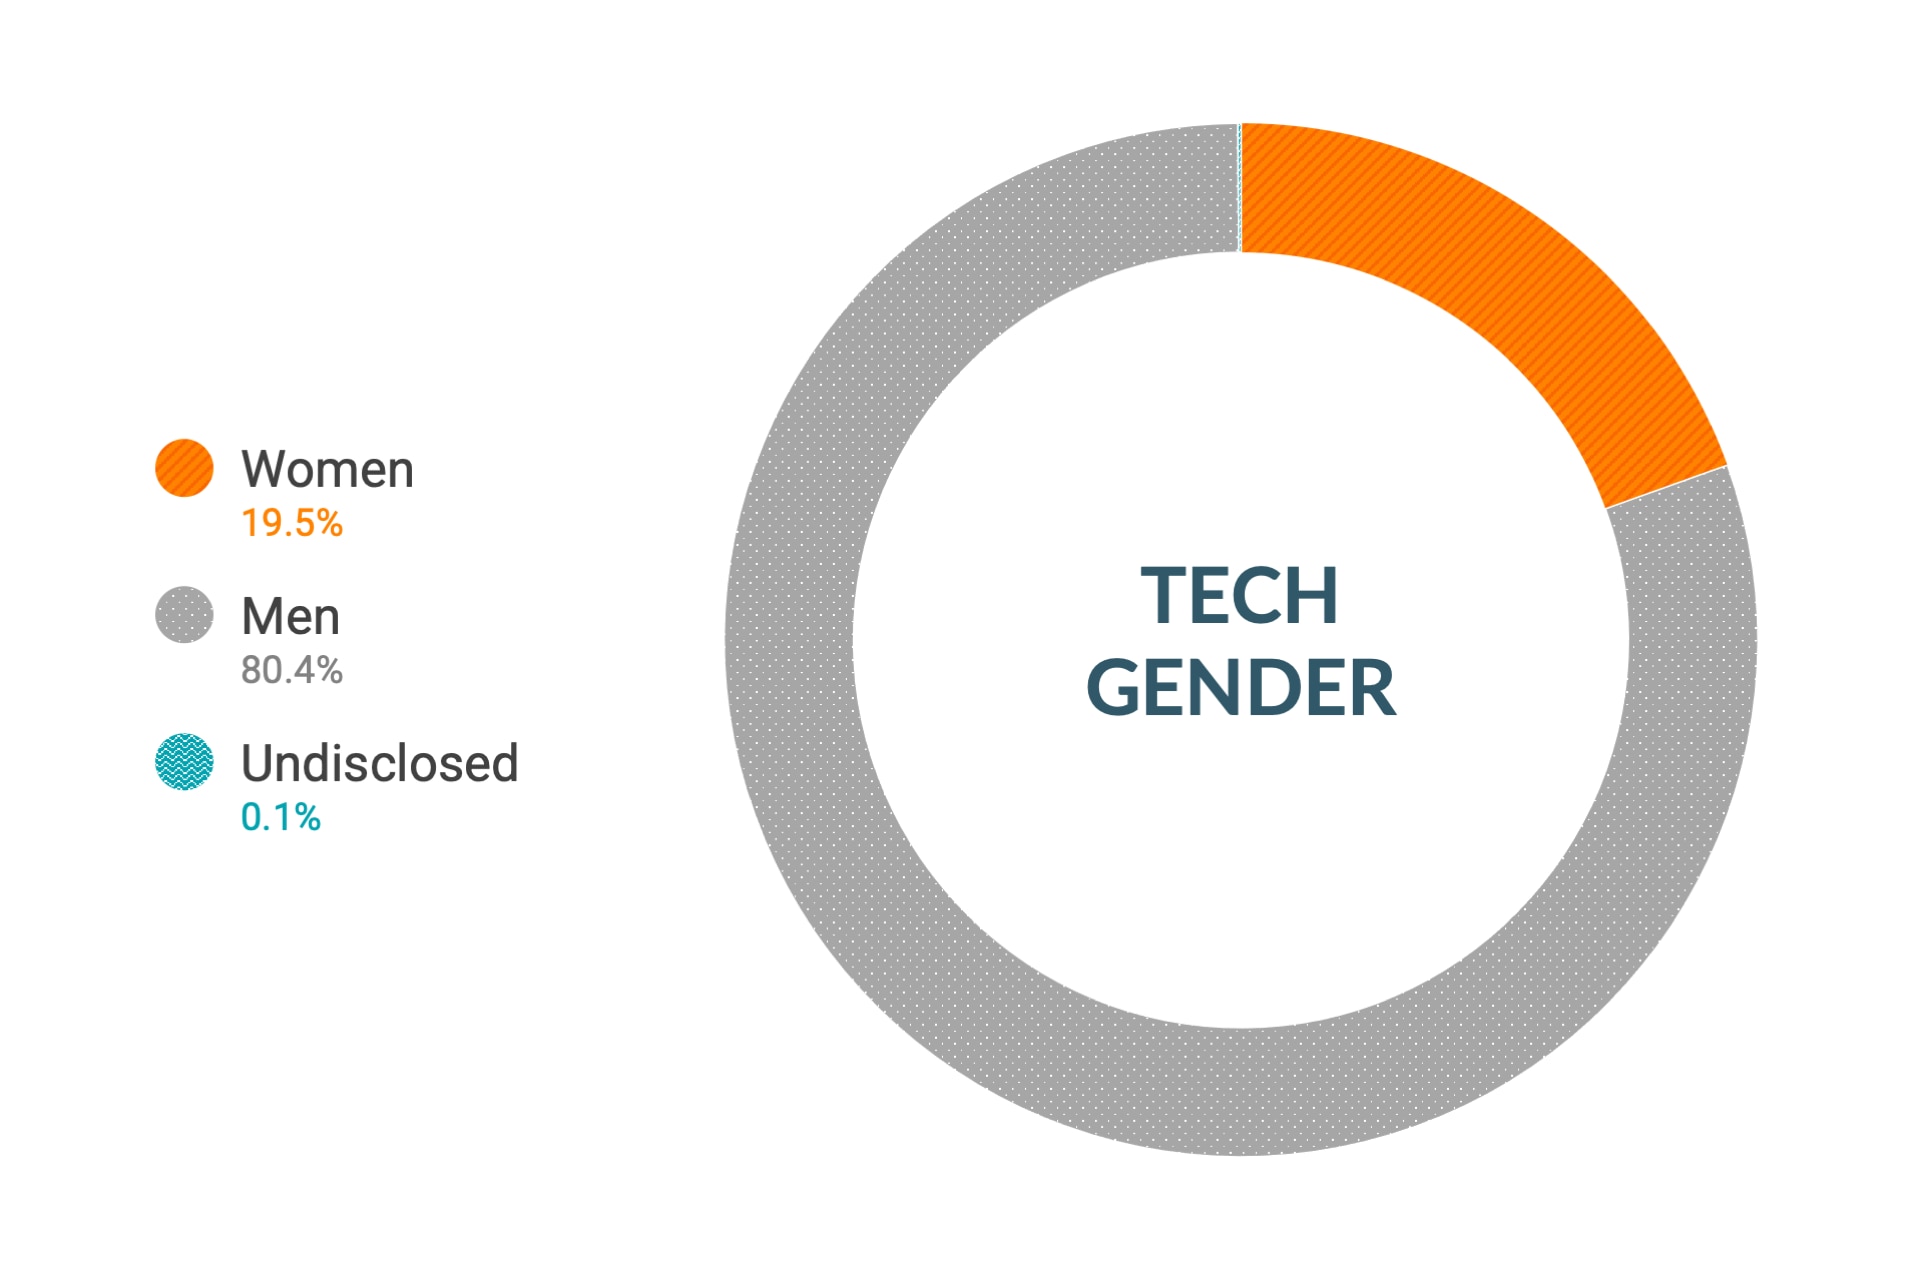 Cloudera Diversity and Inclusion data for Gender in Global Technical and Engineering Roles Roles: Women 19.5%, Men 80.4%, Undisclosed 0.1%